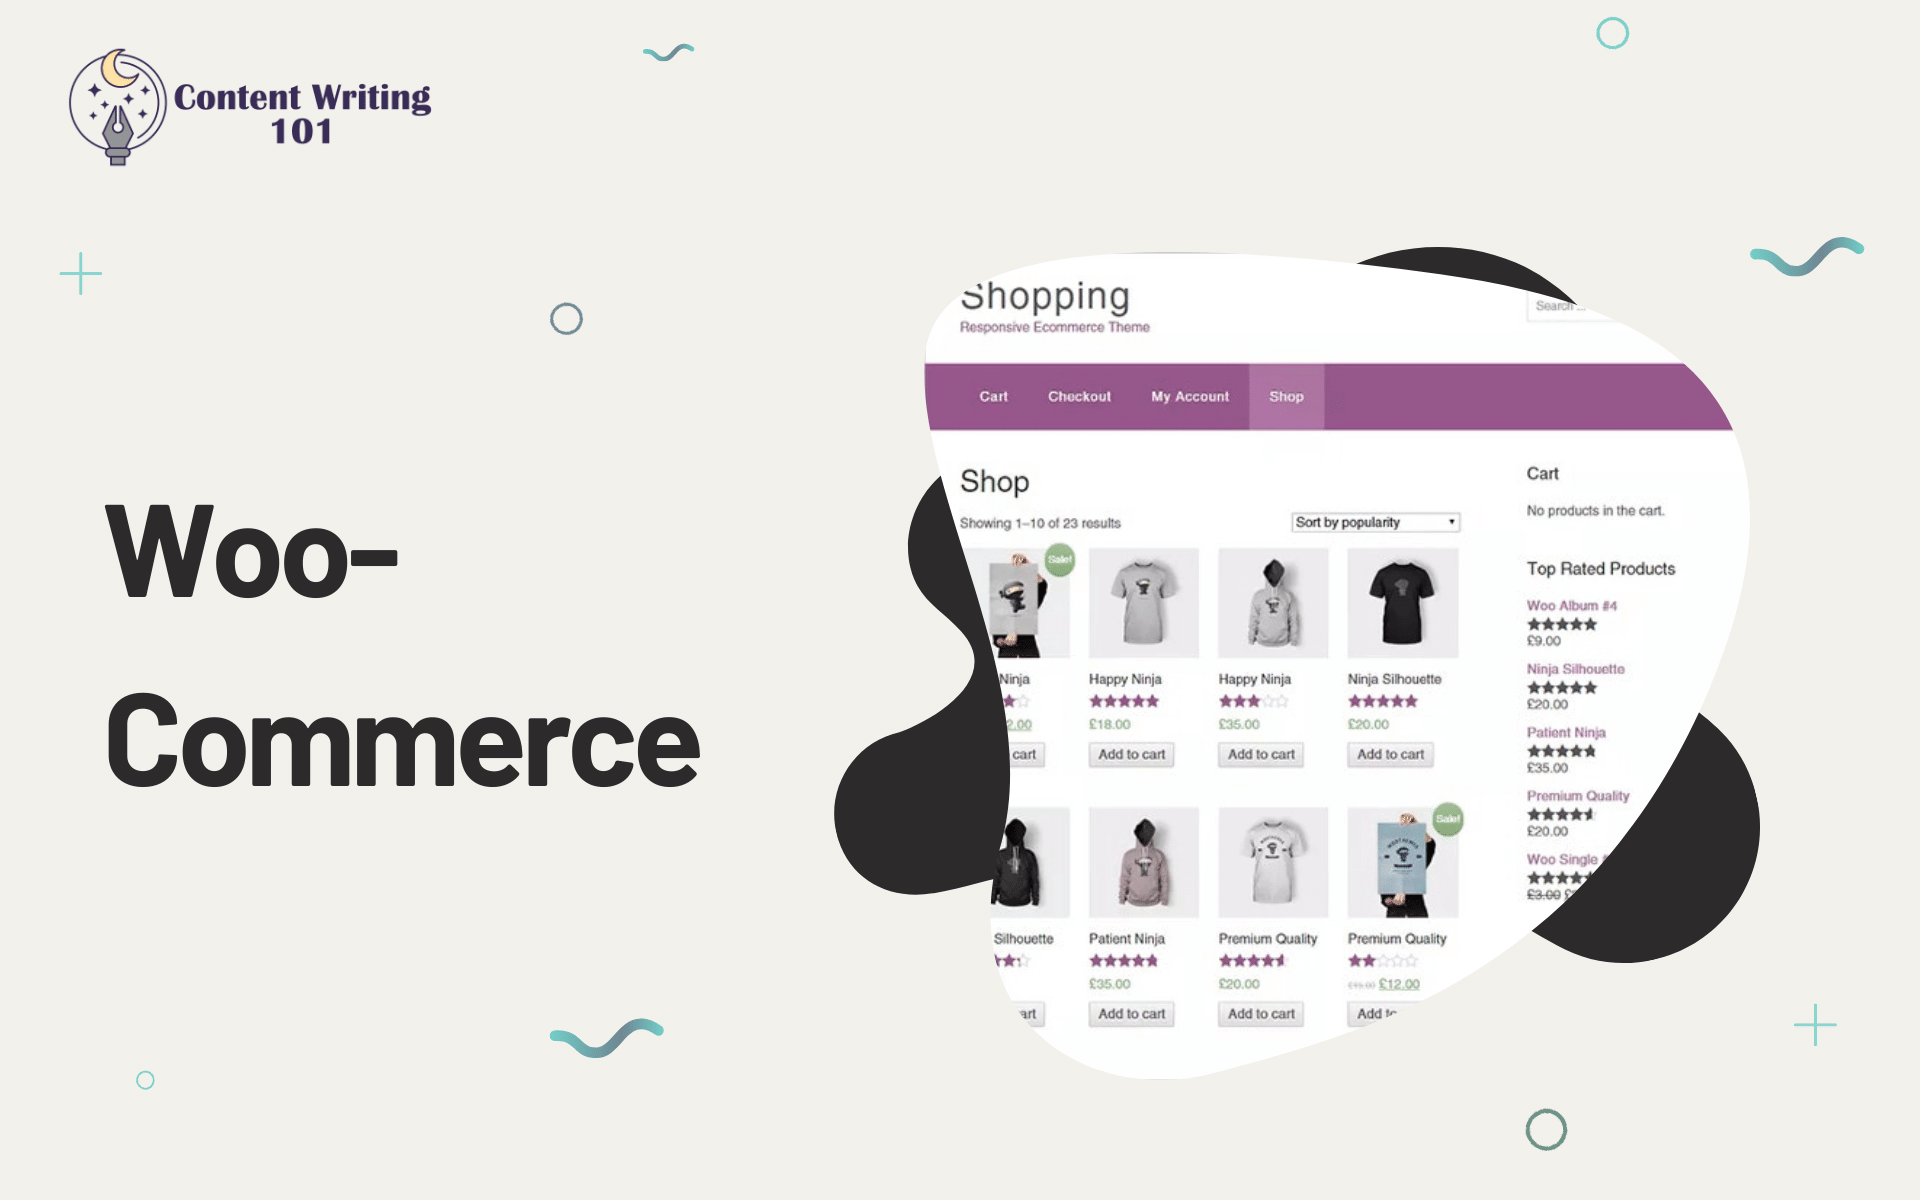 WooCommerce Content Writing 101